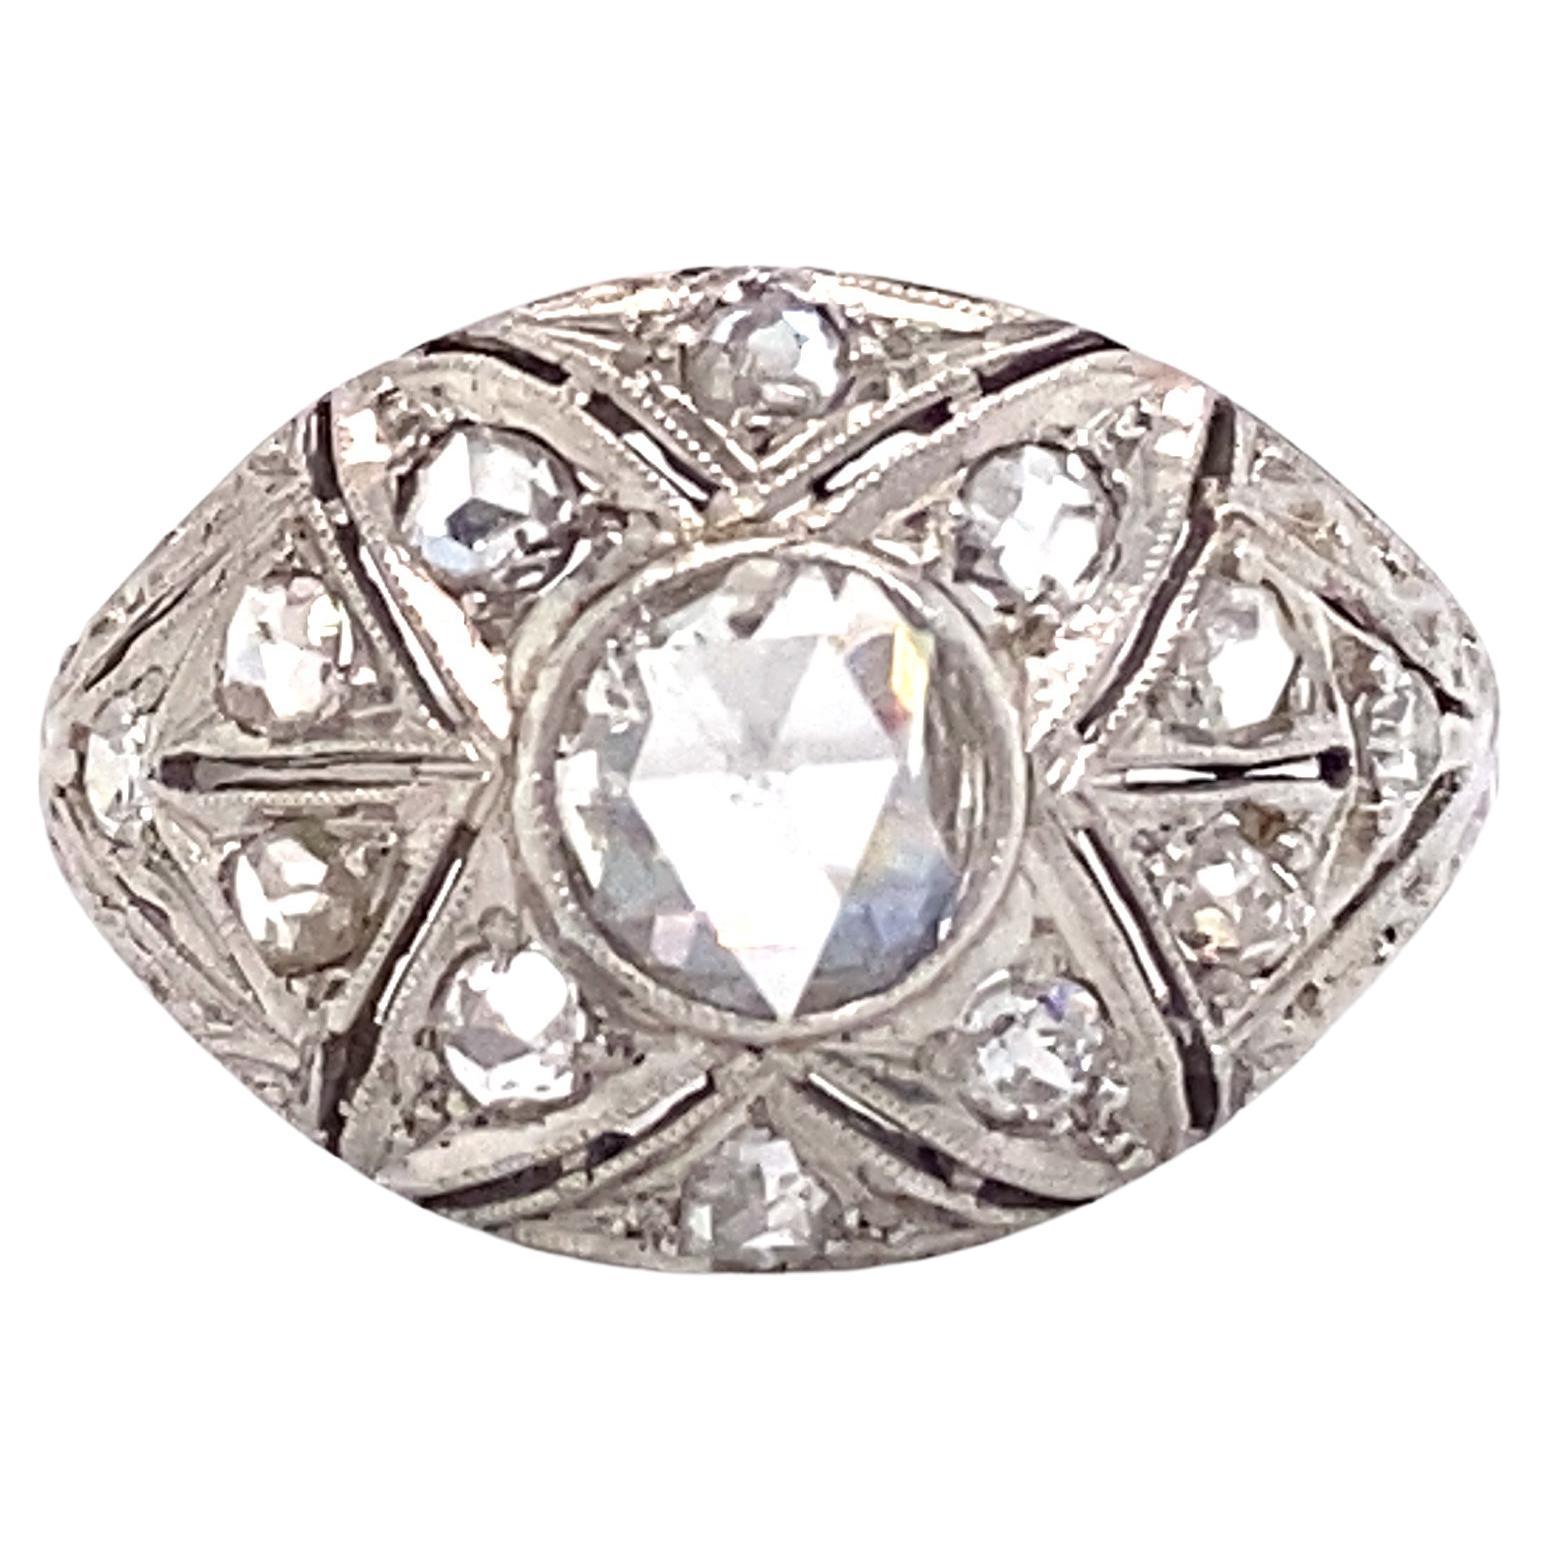 Circa 1890s Victorian Rose Cut Diamond Ring in Platinum and 14K White Gold